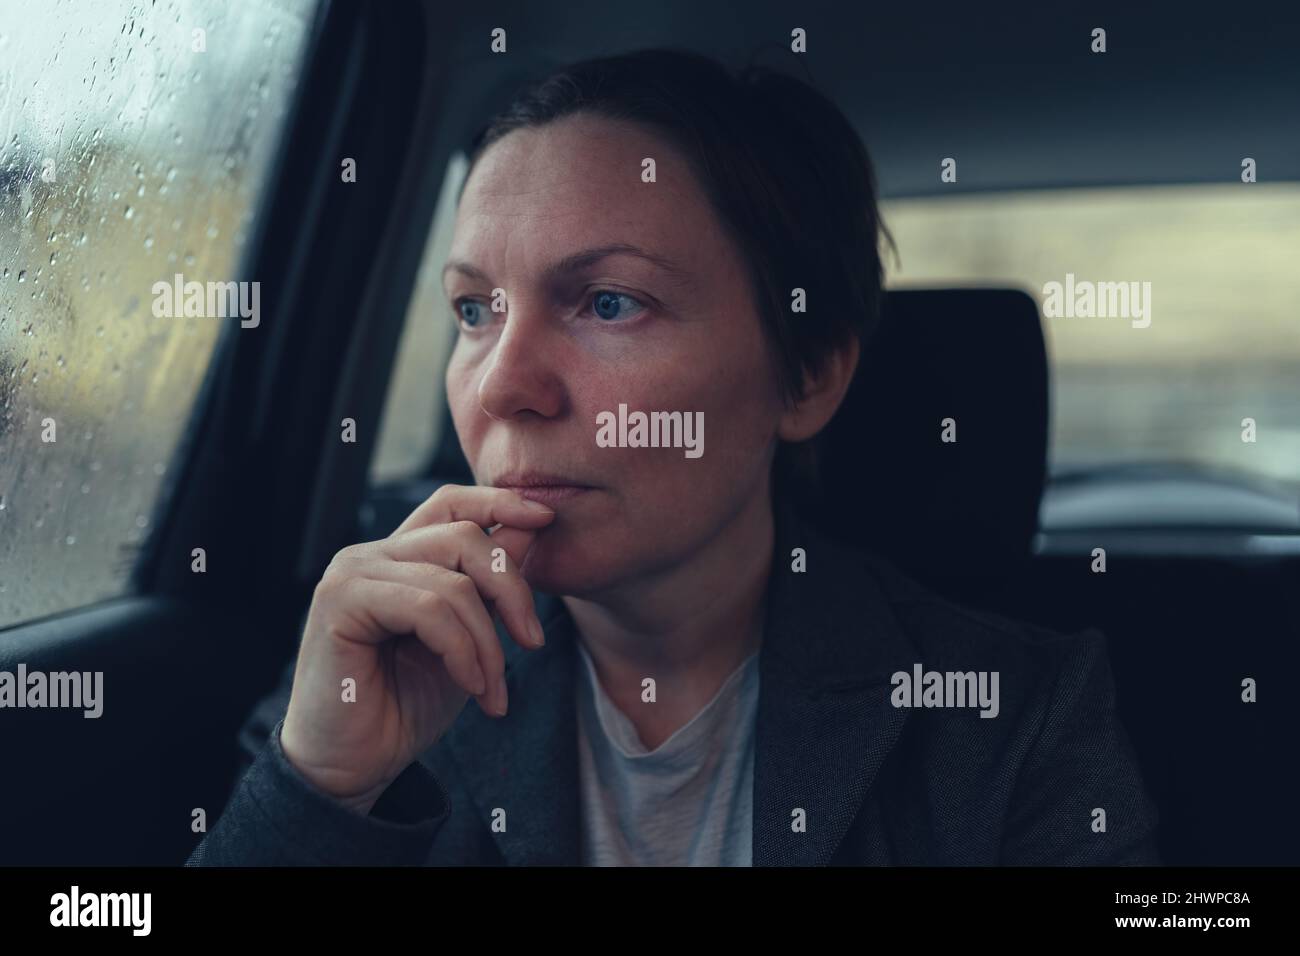 Disappointed and worried businesswoman looking out the window of taxi vehicle on cold rainy day on her way to work, selective focus Stock Photo